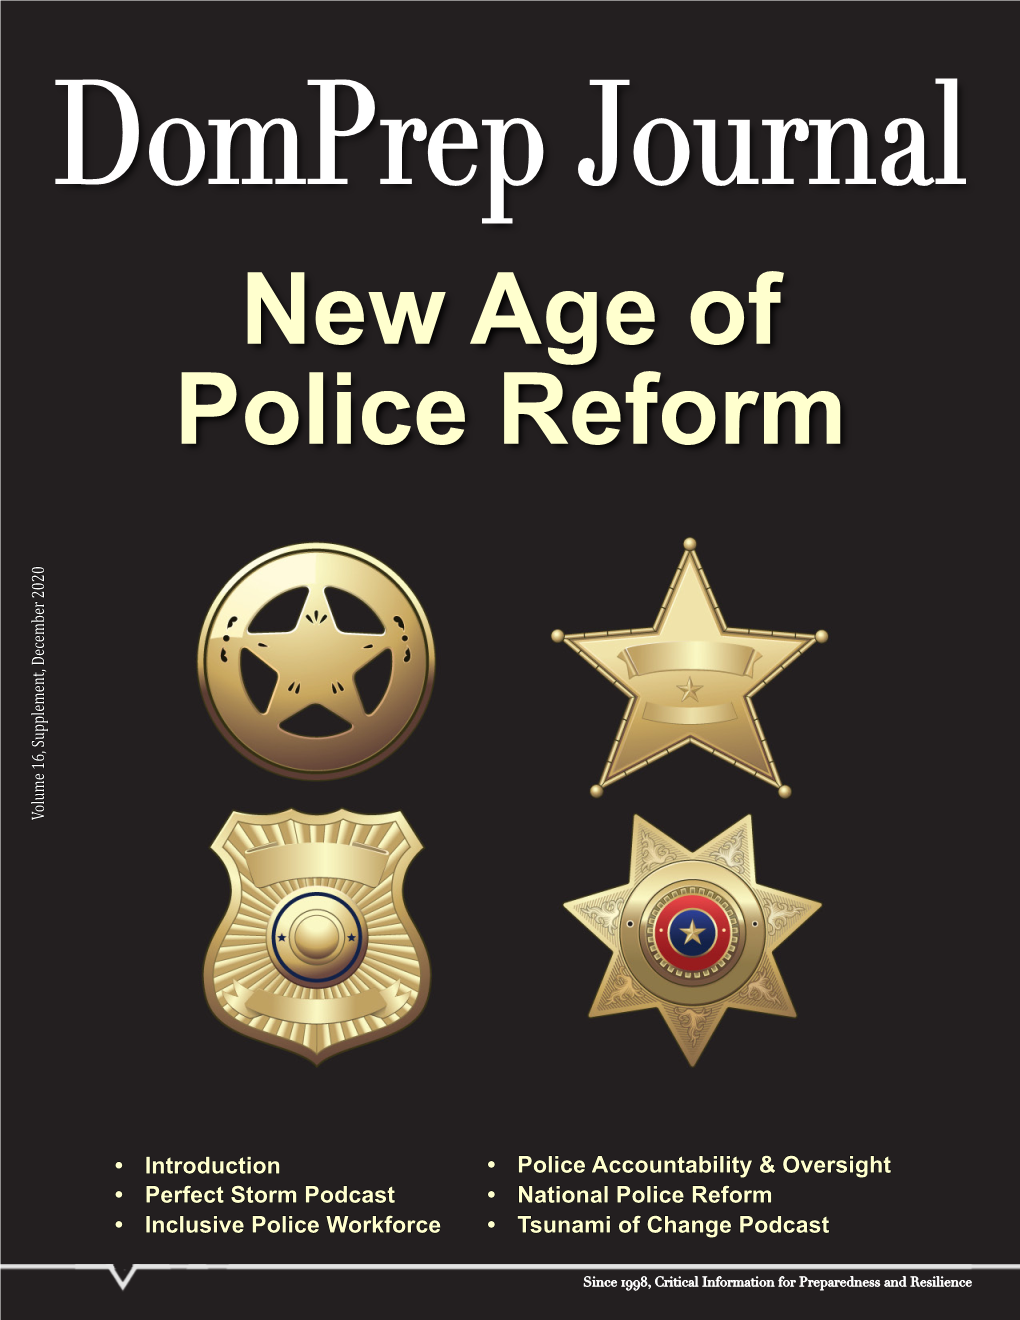 New Age of Police Reform Special Issue Reprint of Joseph W